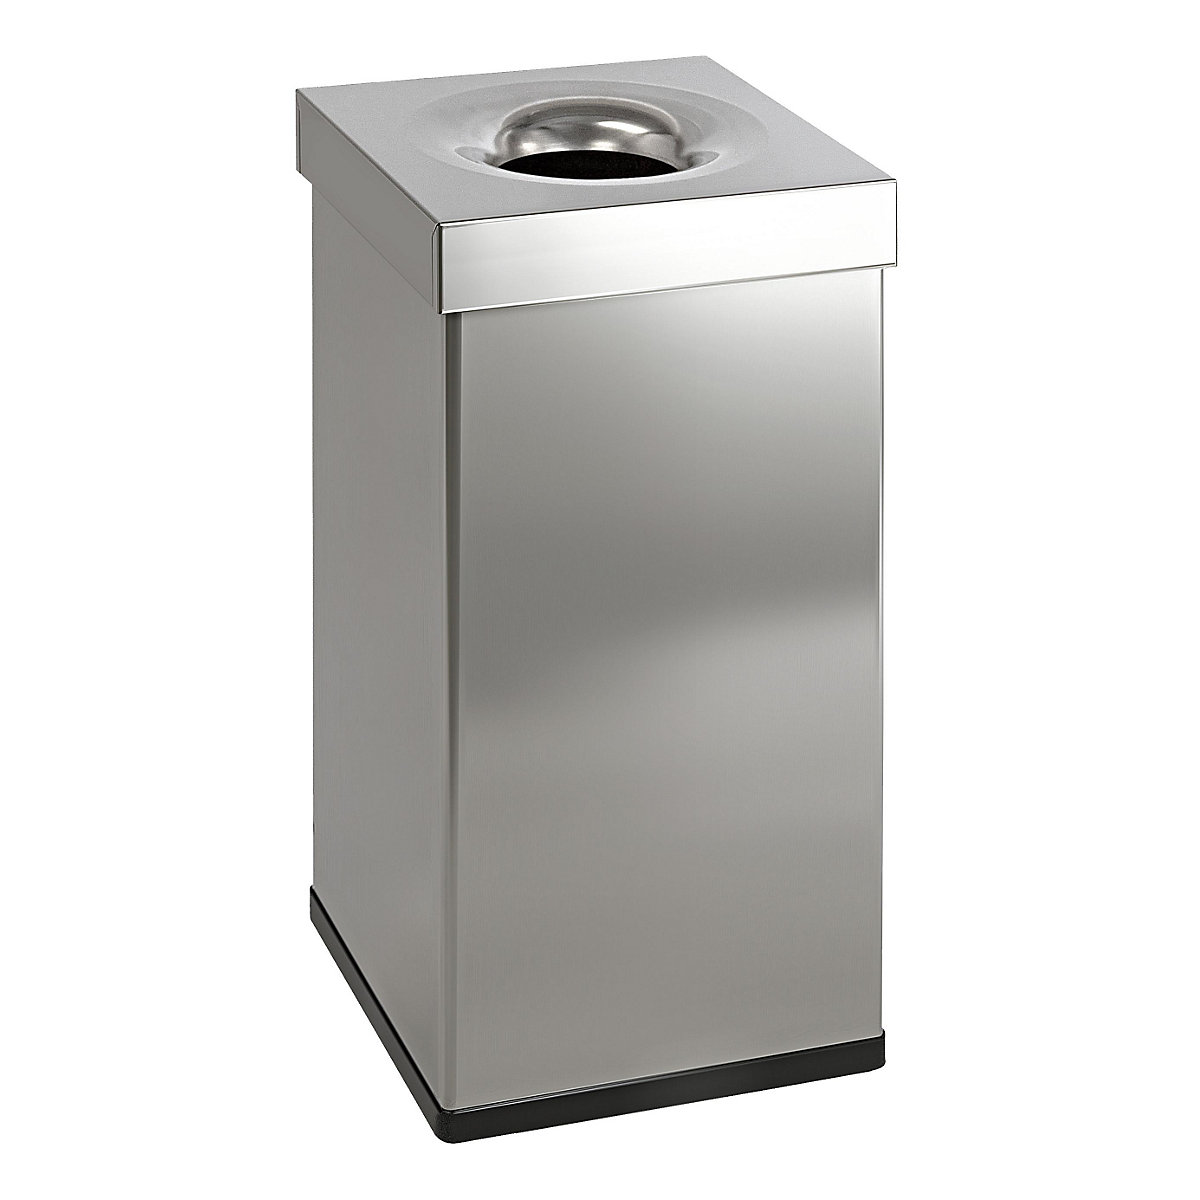 Waste paper bin, square, capacity 55 l, WxHxD 300 x 600 x 300 mm, stainless steel-1